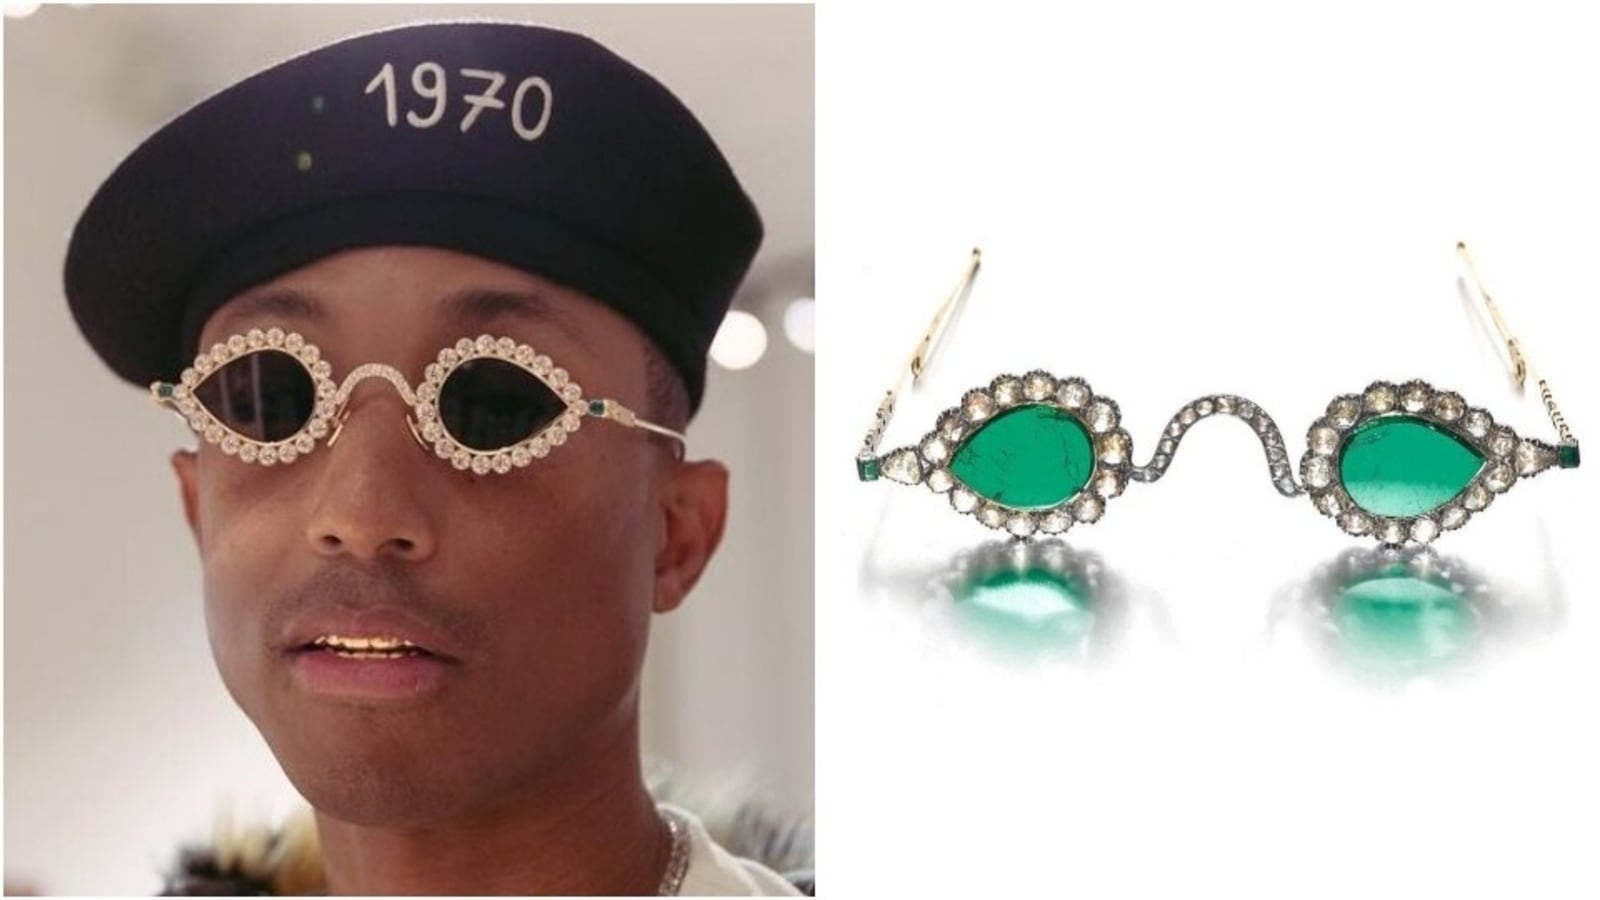 Tiffany Is Collaborating With Pharrell Williams – WWD